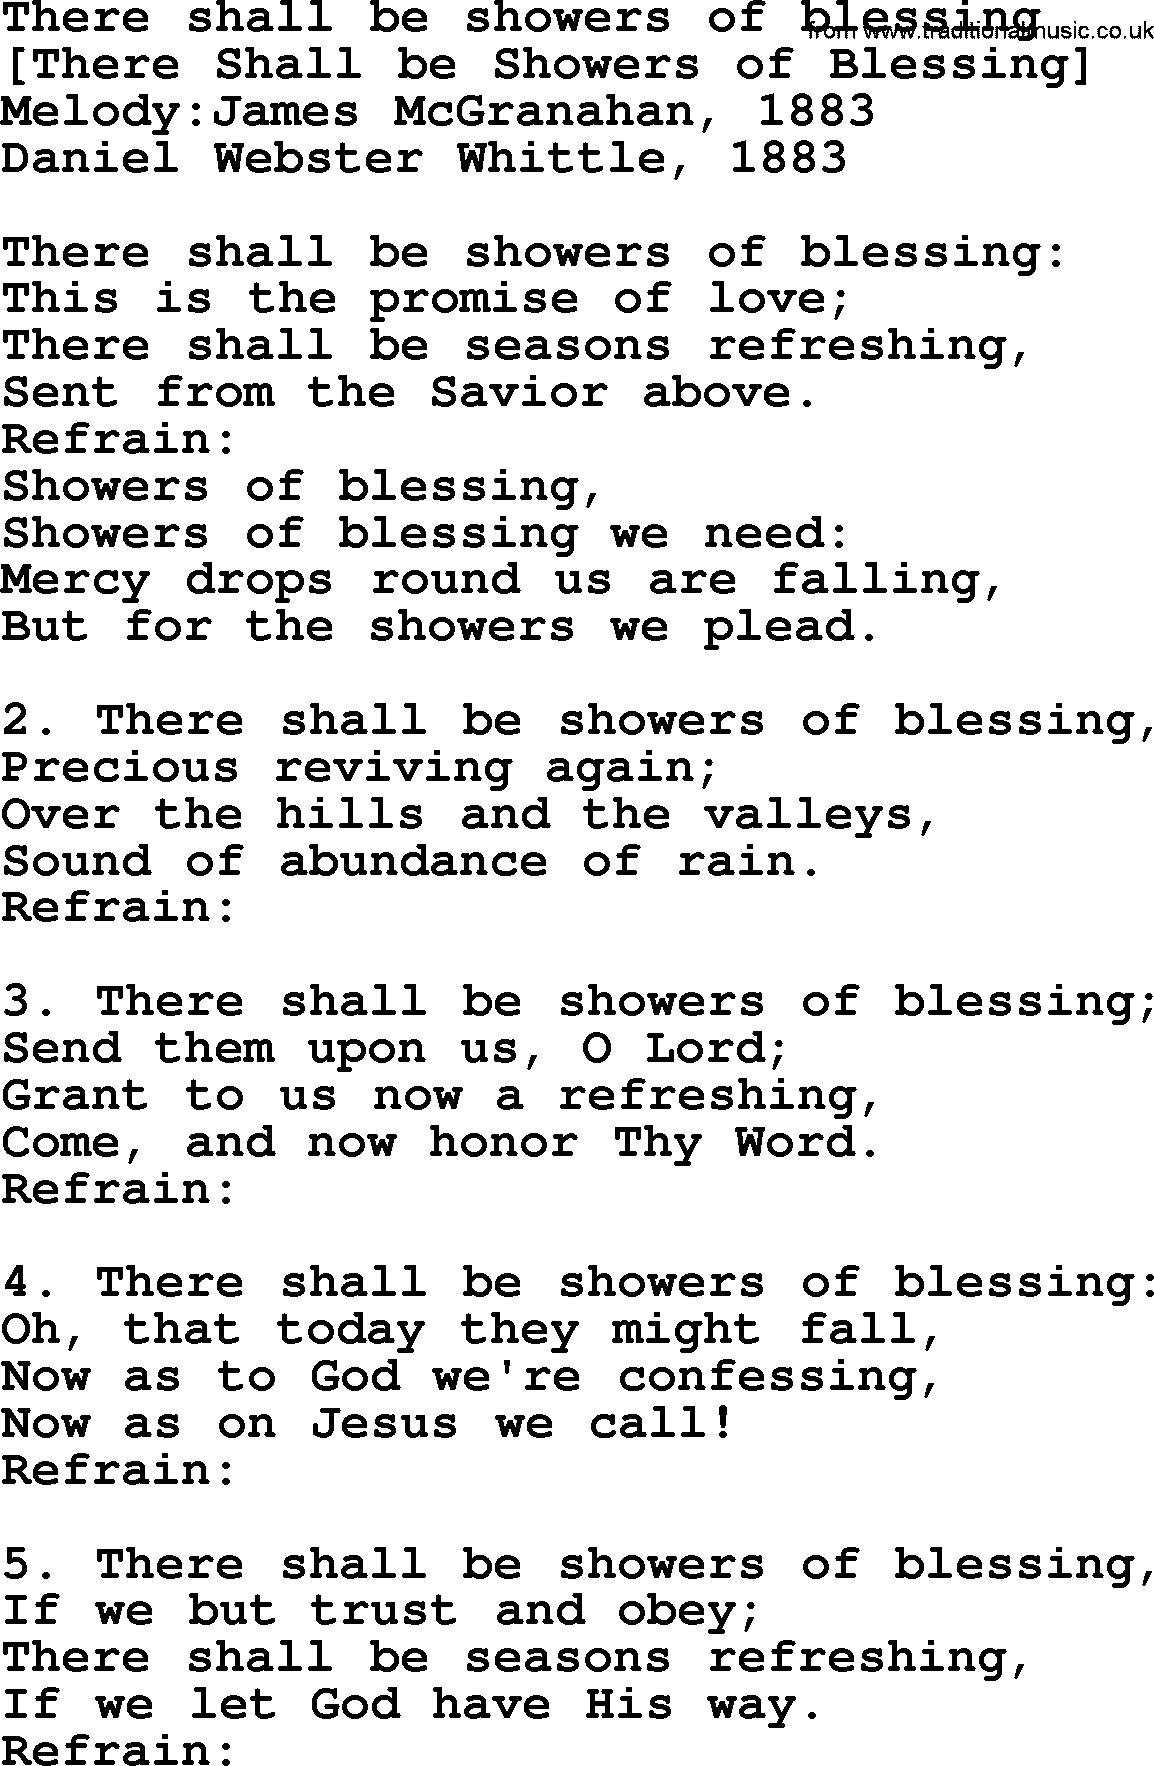 Old American Song: There Shall Be Showers Of Blessing, lyrics